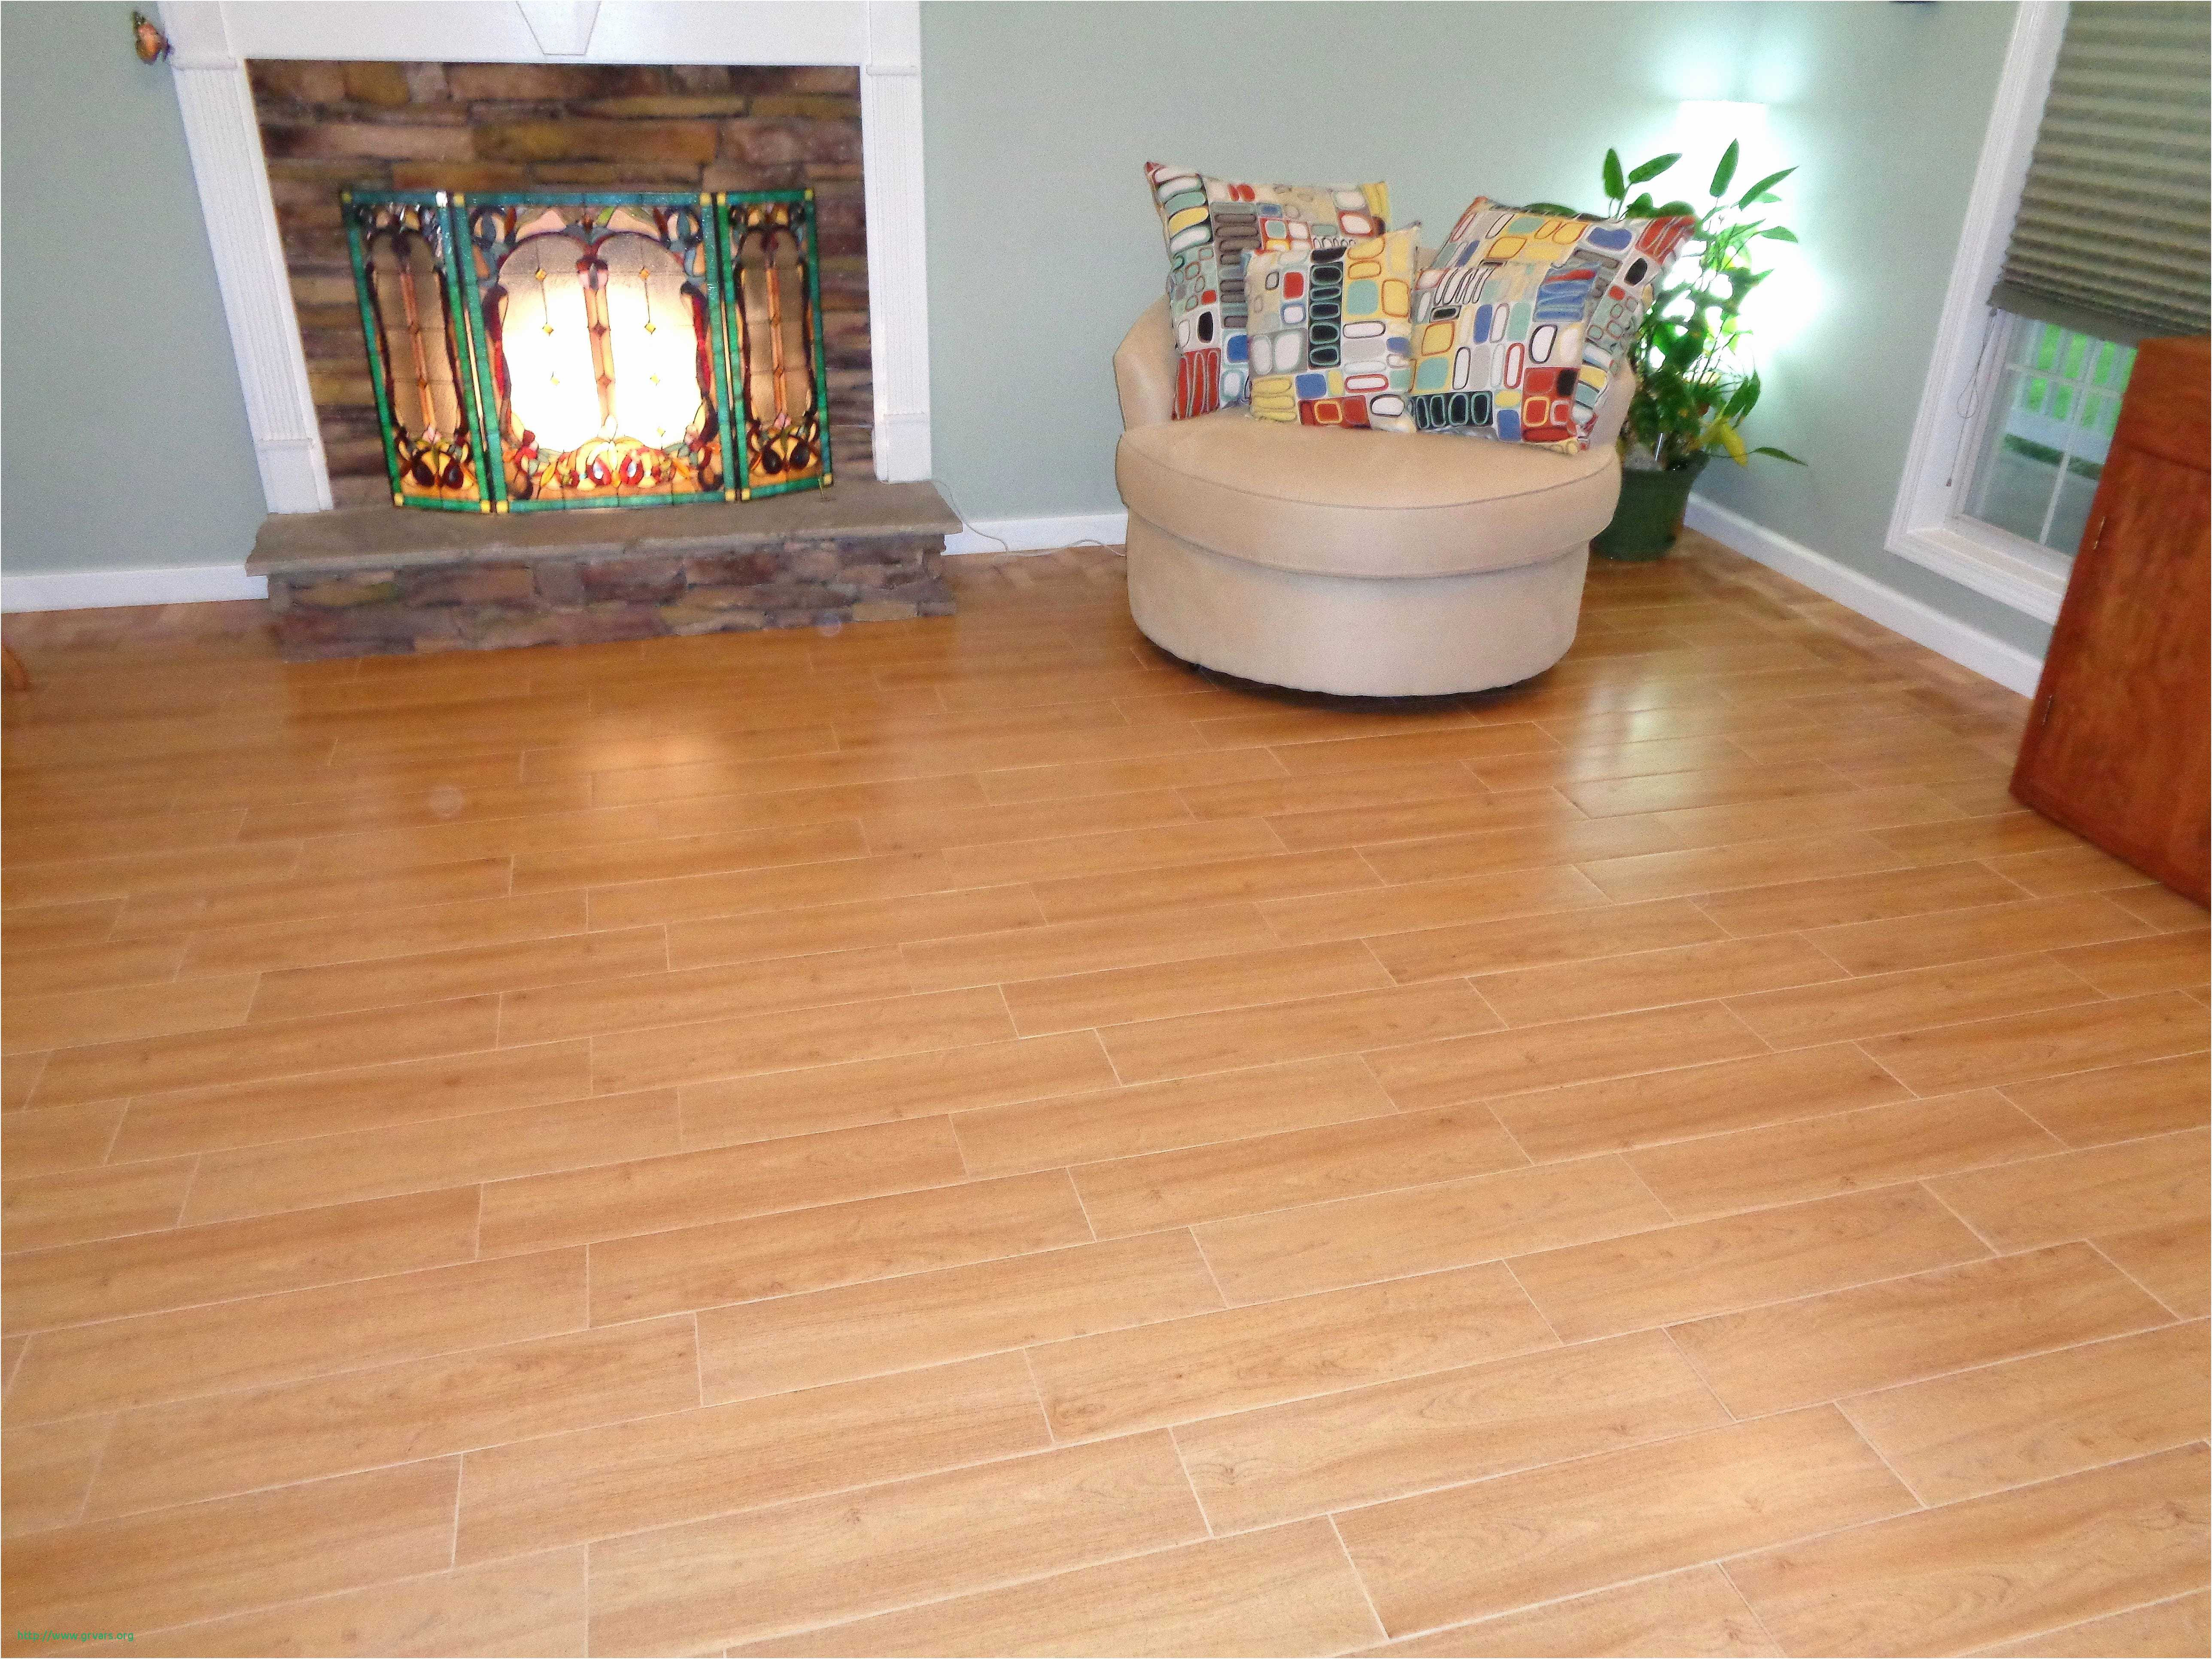 16 Perfect How to Put Hardwood Floor On Concrete 2024 free download how to put hardwood floor on concrete of 24 beau changing the color of hardwood floors ideas blog inside wood planks changing the color of hardwood floors inspirant pergo flooring colors con